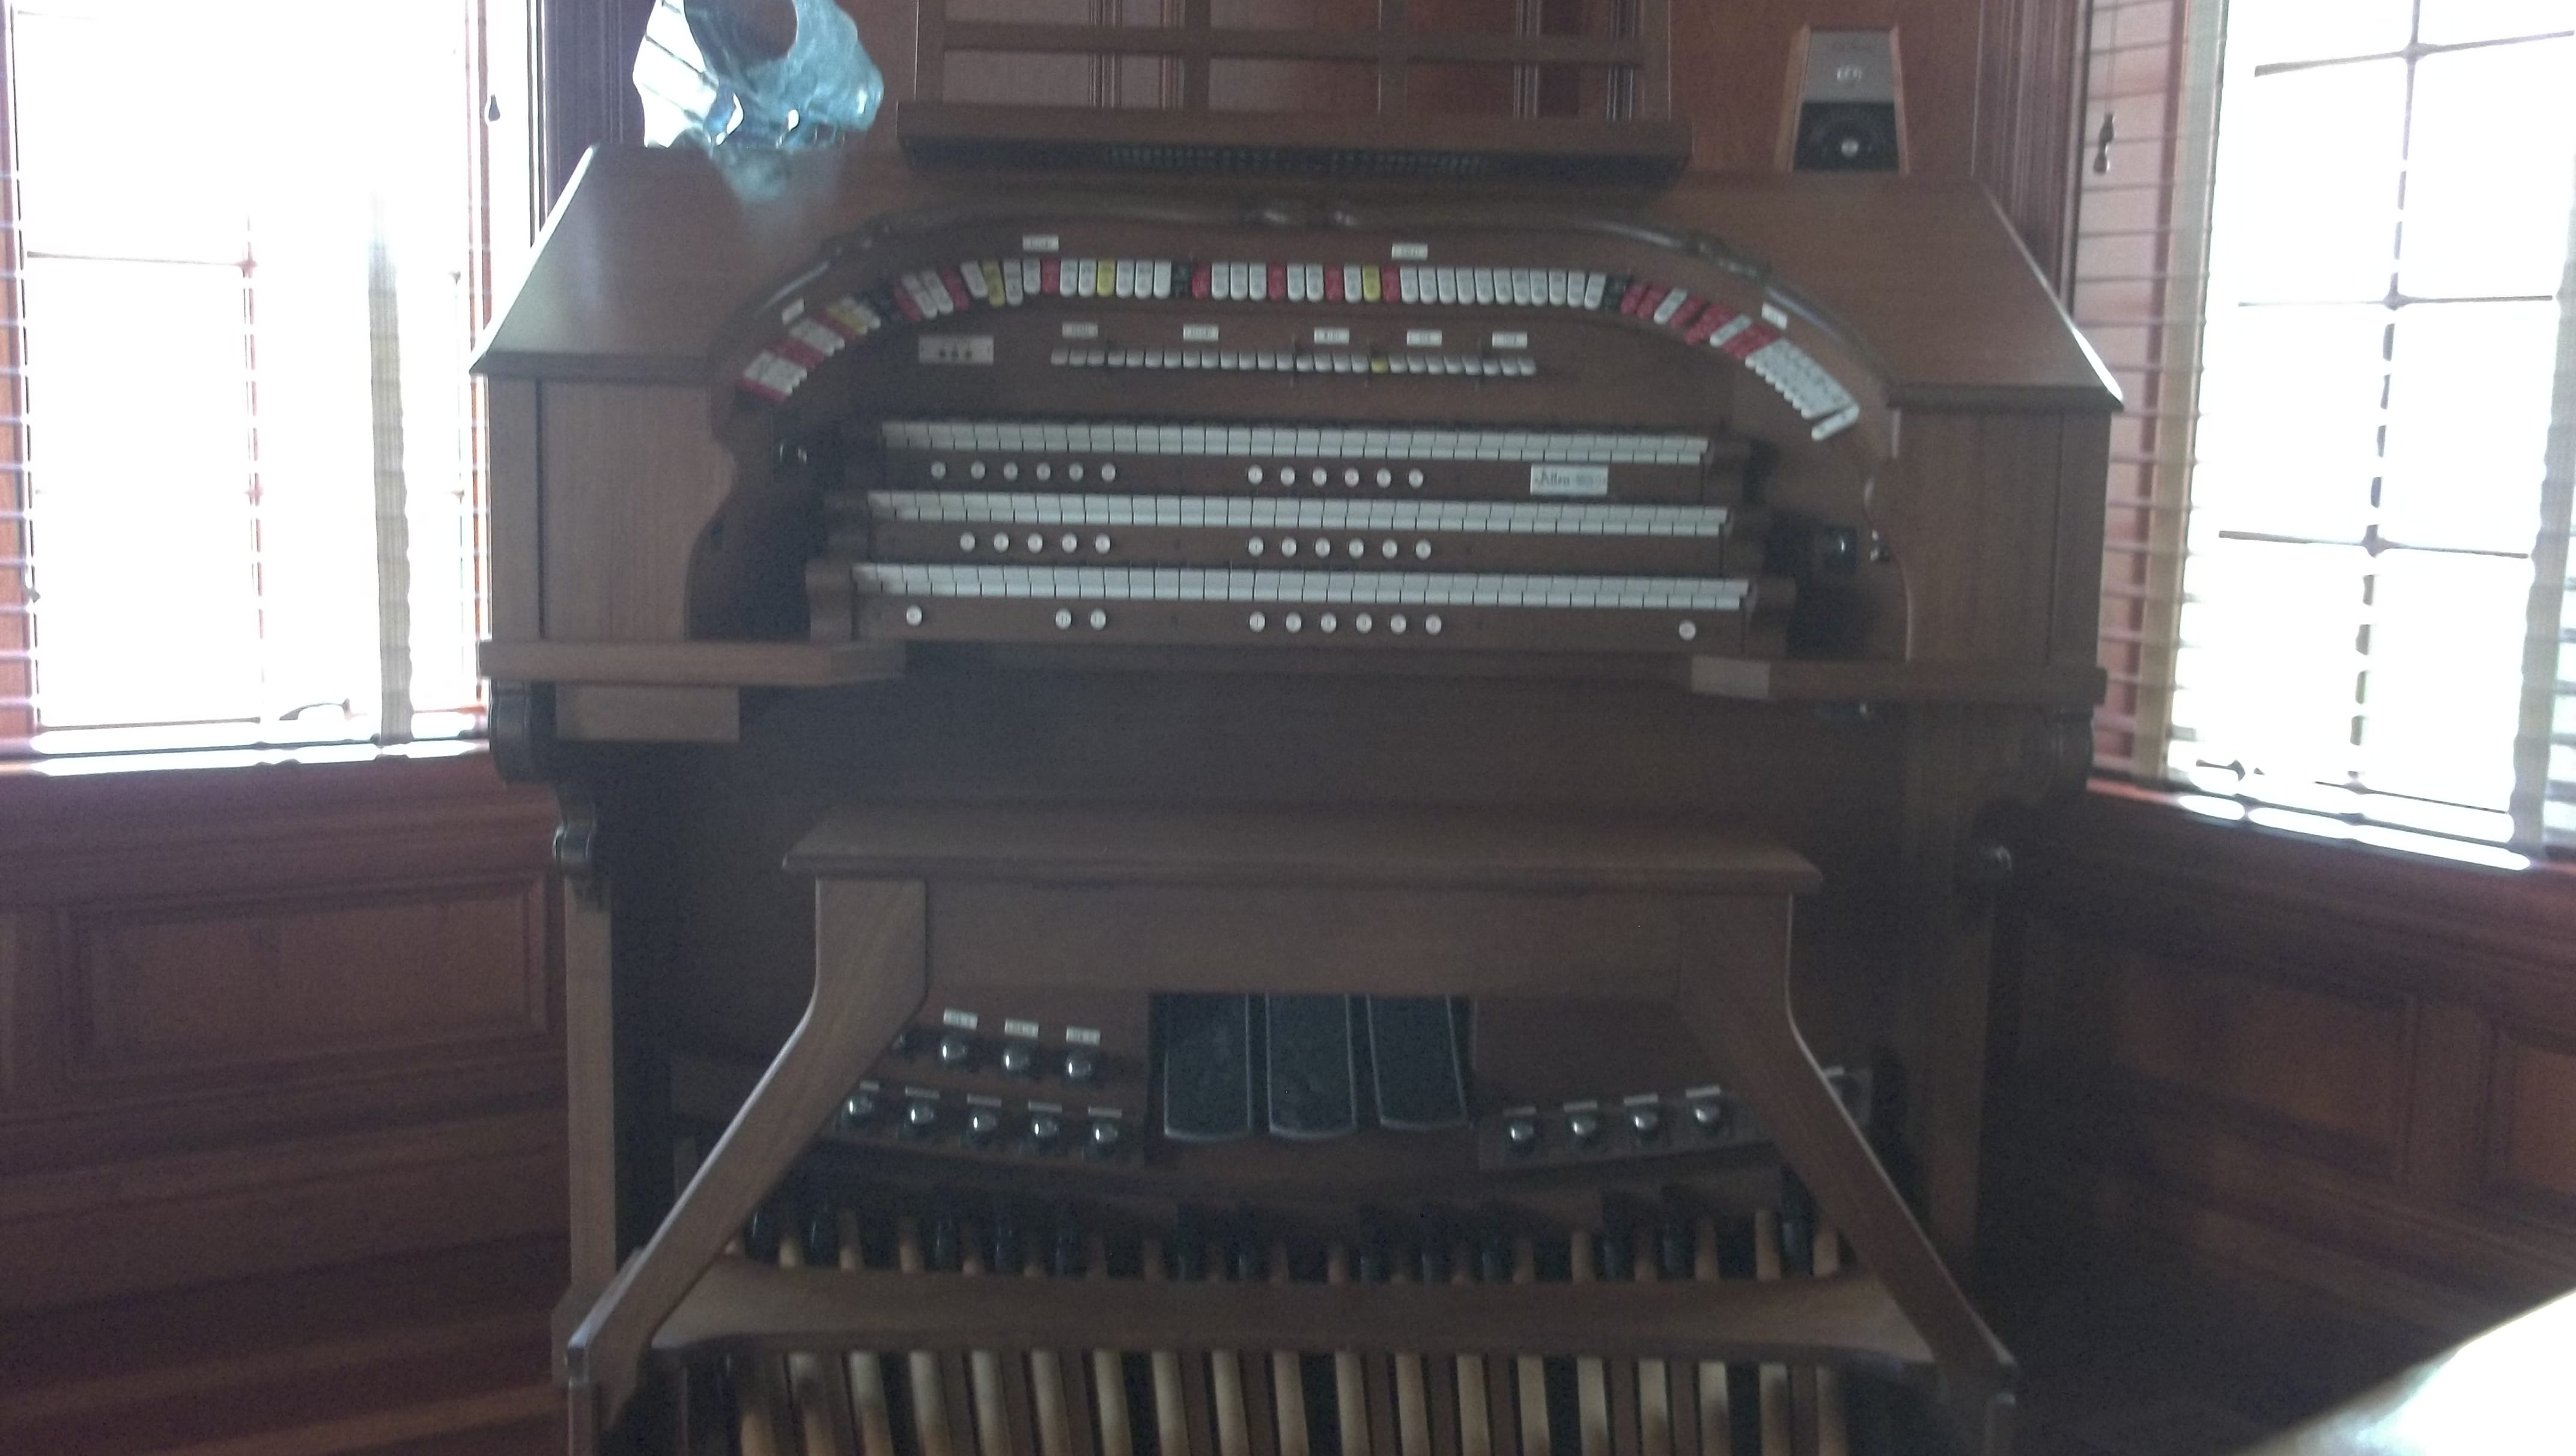 One of several pipe organs in the home.